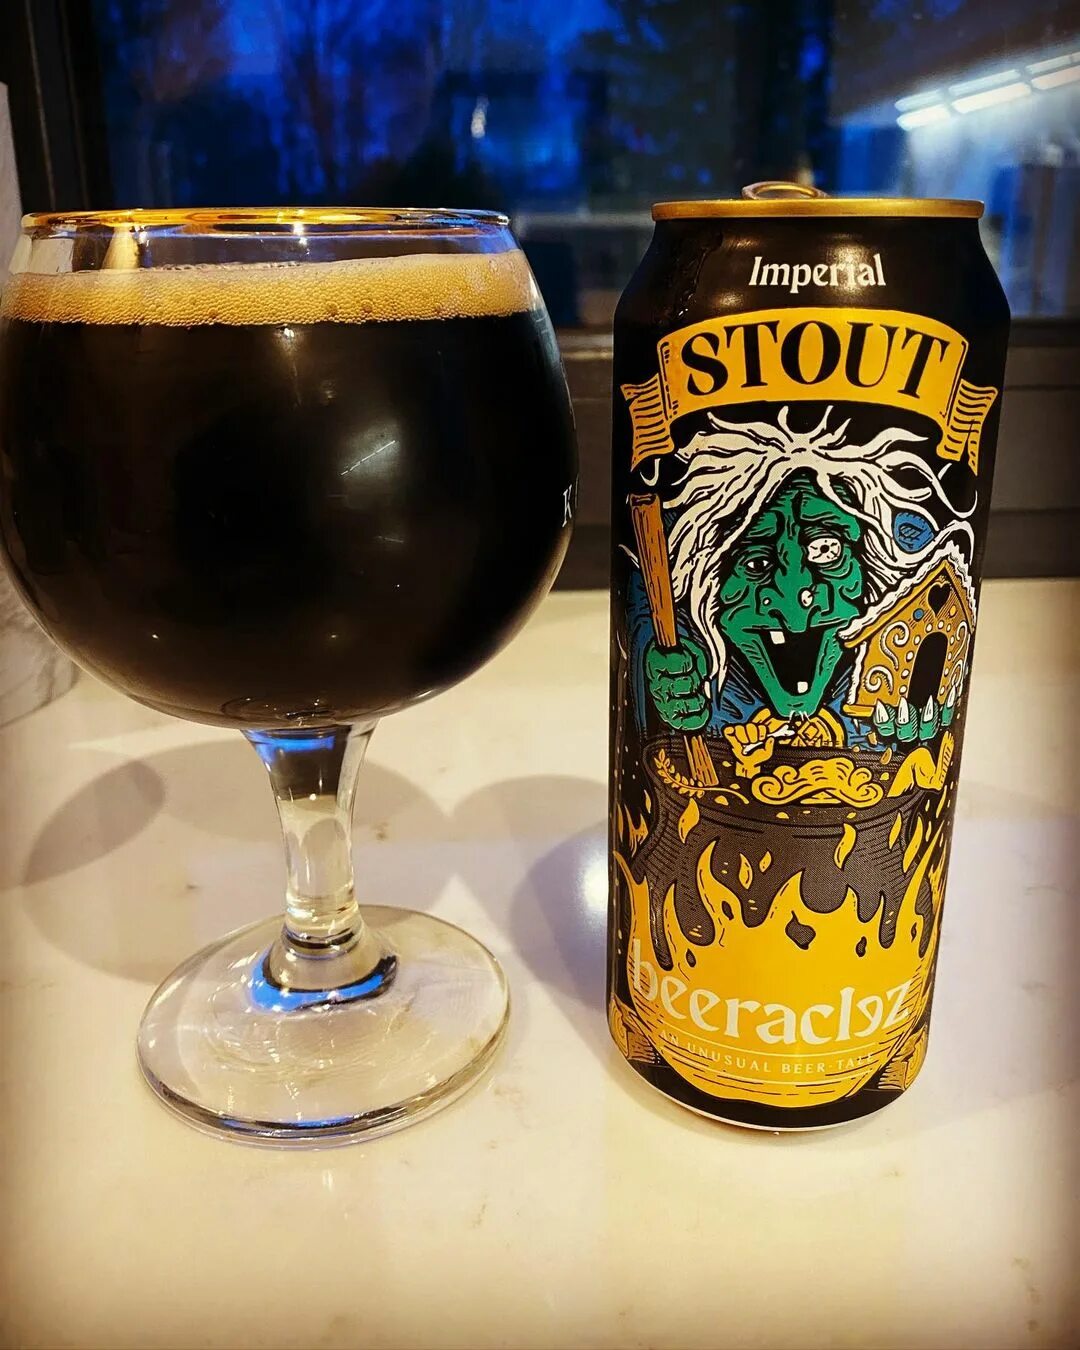 Steam brew imperial stout in can фото 79